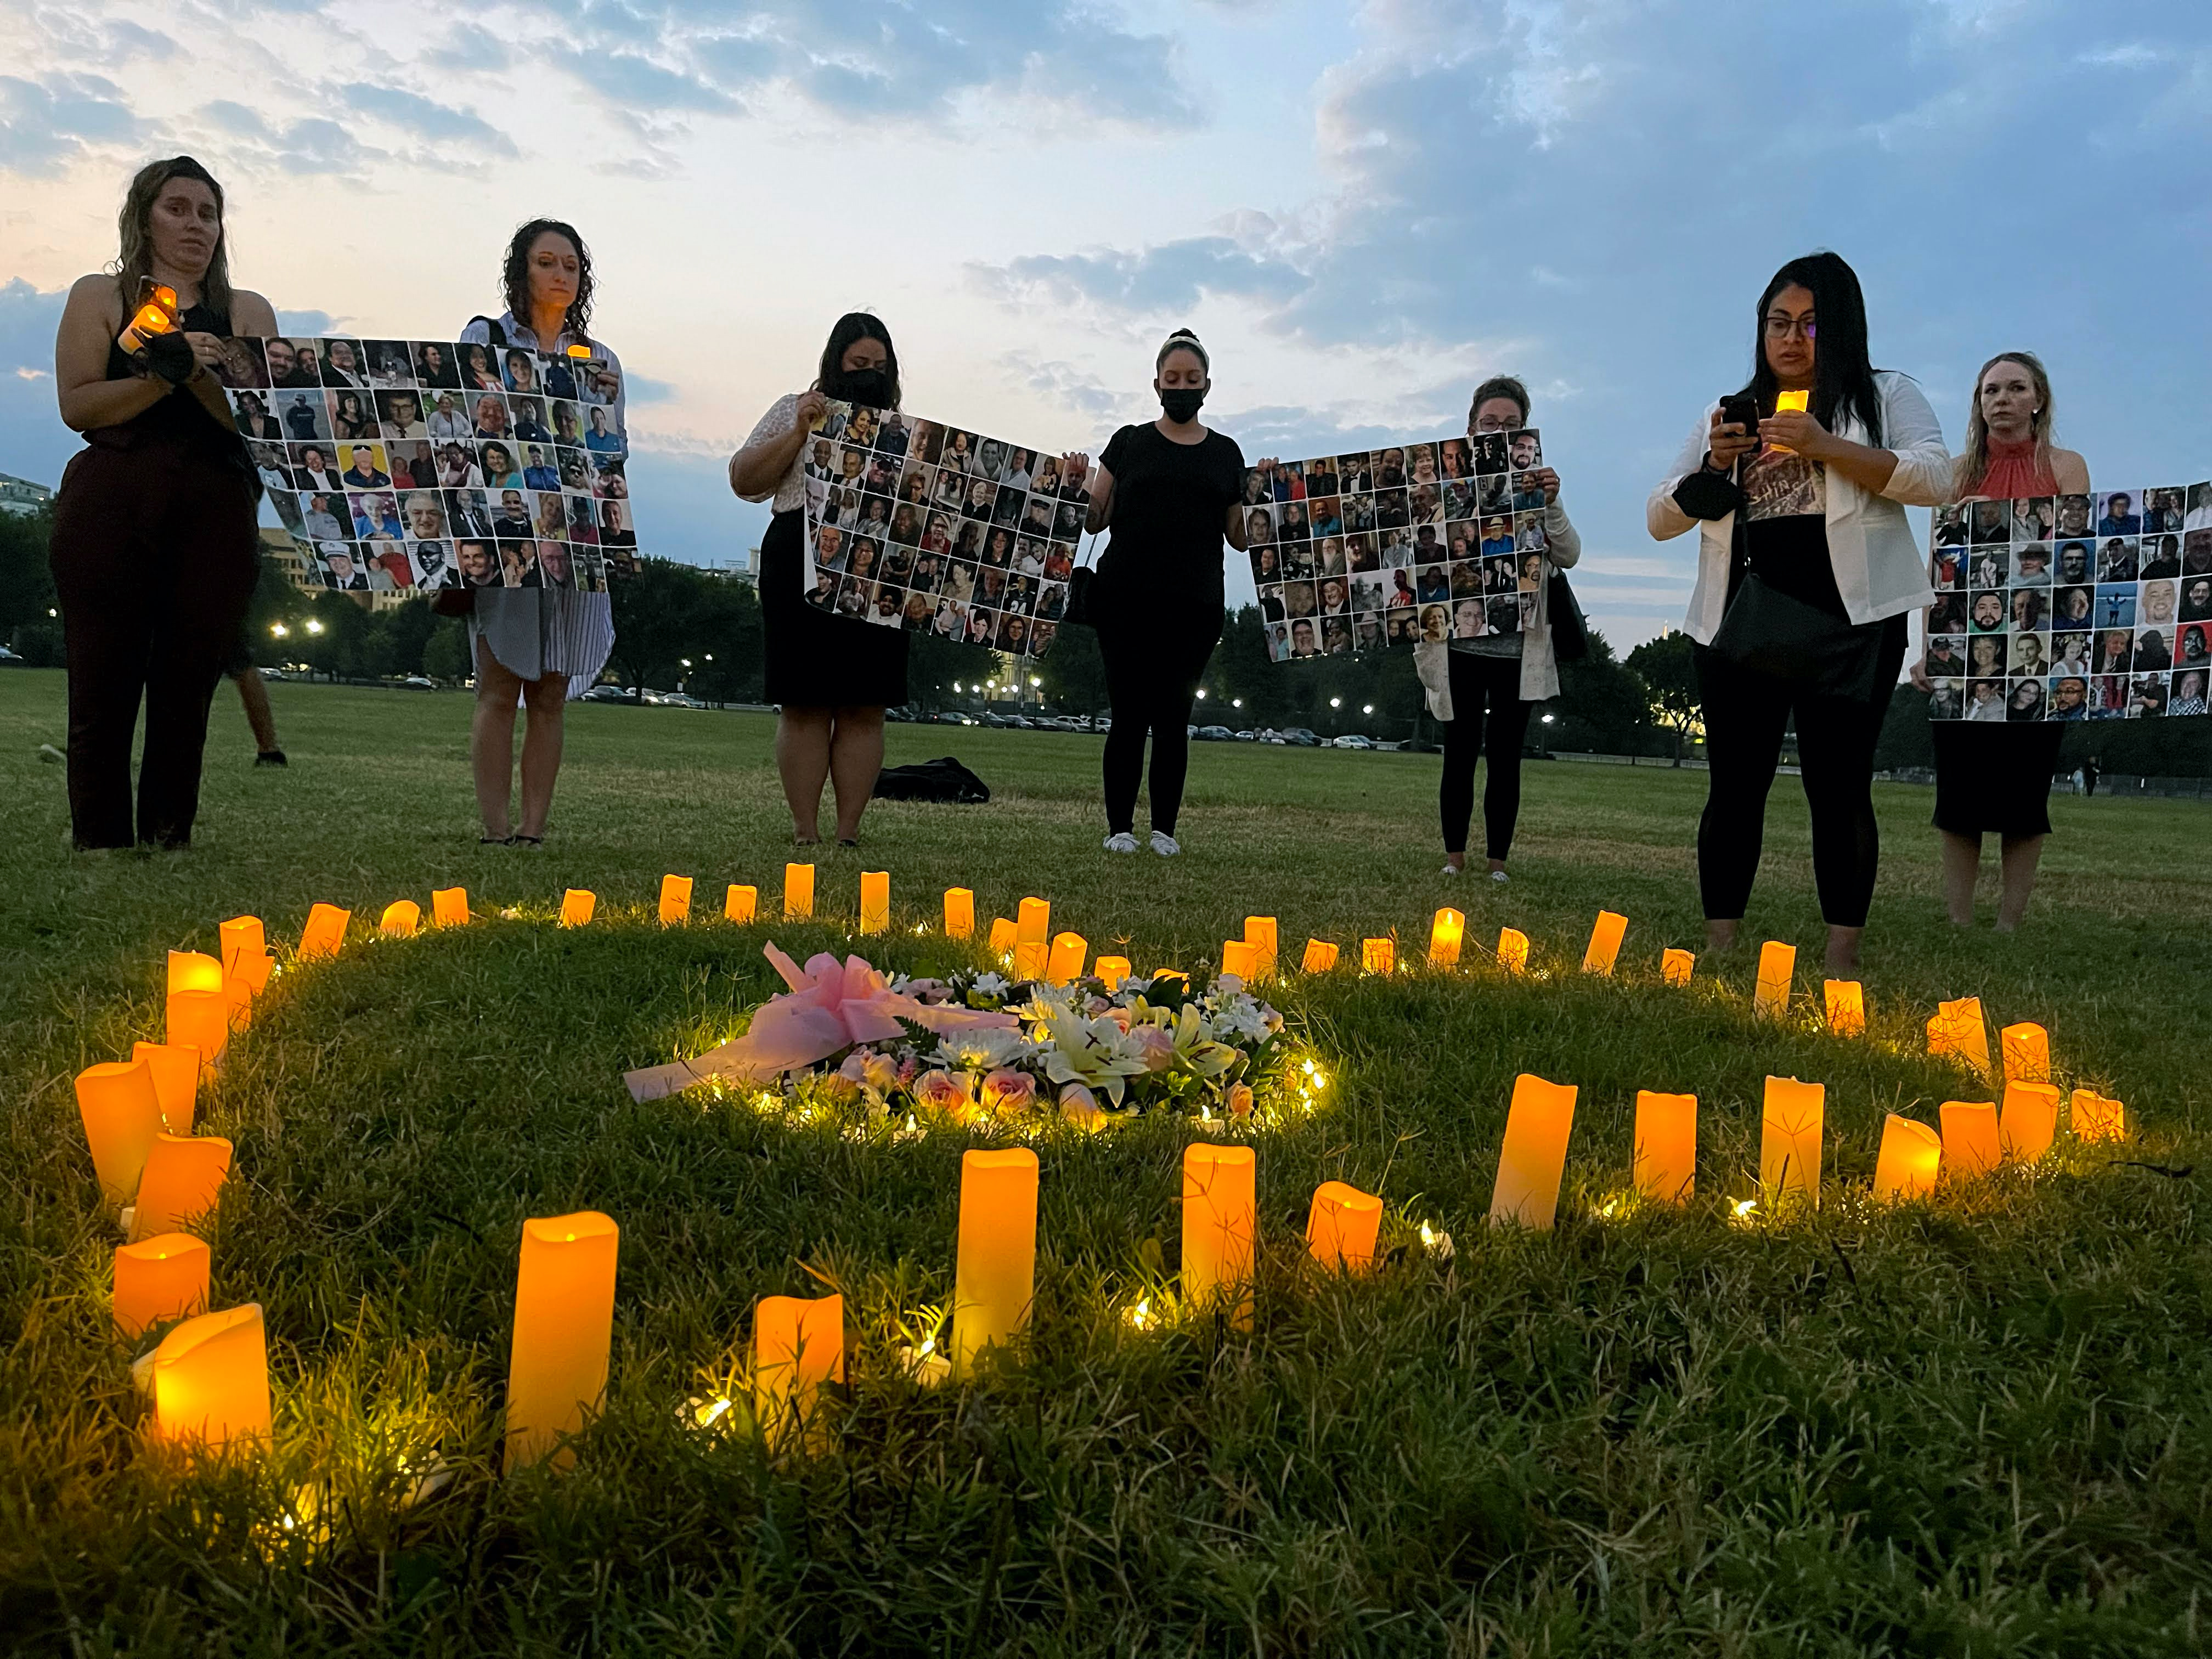 Activists lobbying in Washington D.C. hold up images of lost loved ones at a lighting ceremony on July 26, 2021. (Rima Samman)